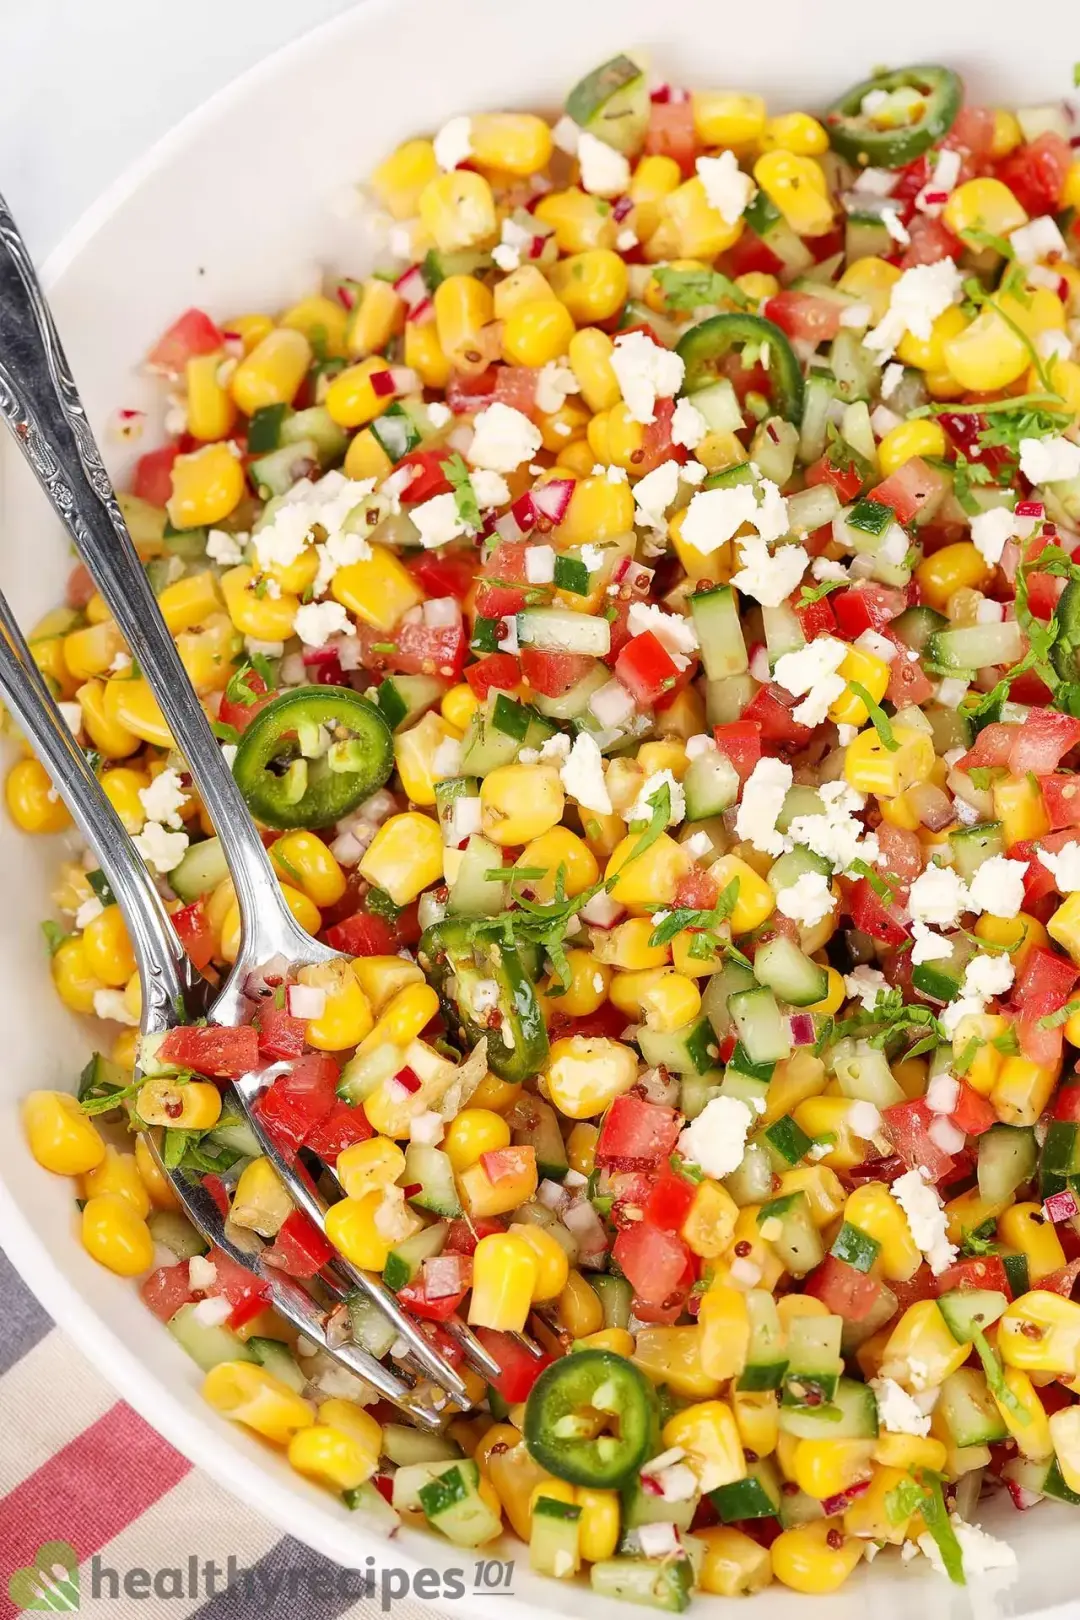 how our corn salad fits the heathy eating guidelines